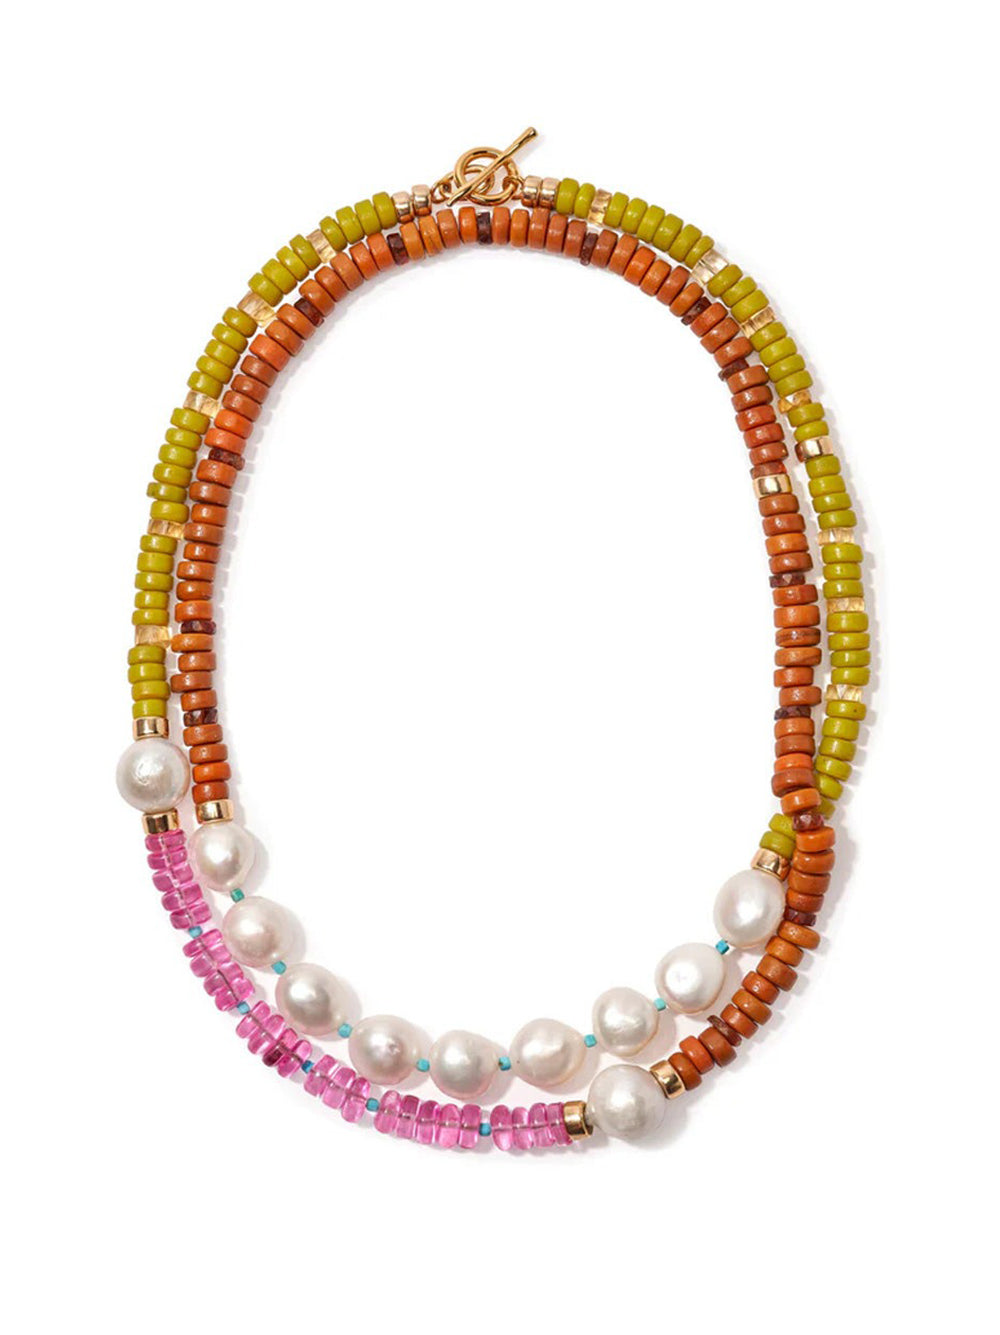 Lizzie Fortunato Cabana Necklace in Dragon Fruit